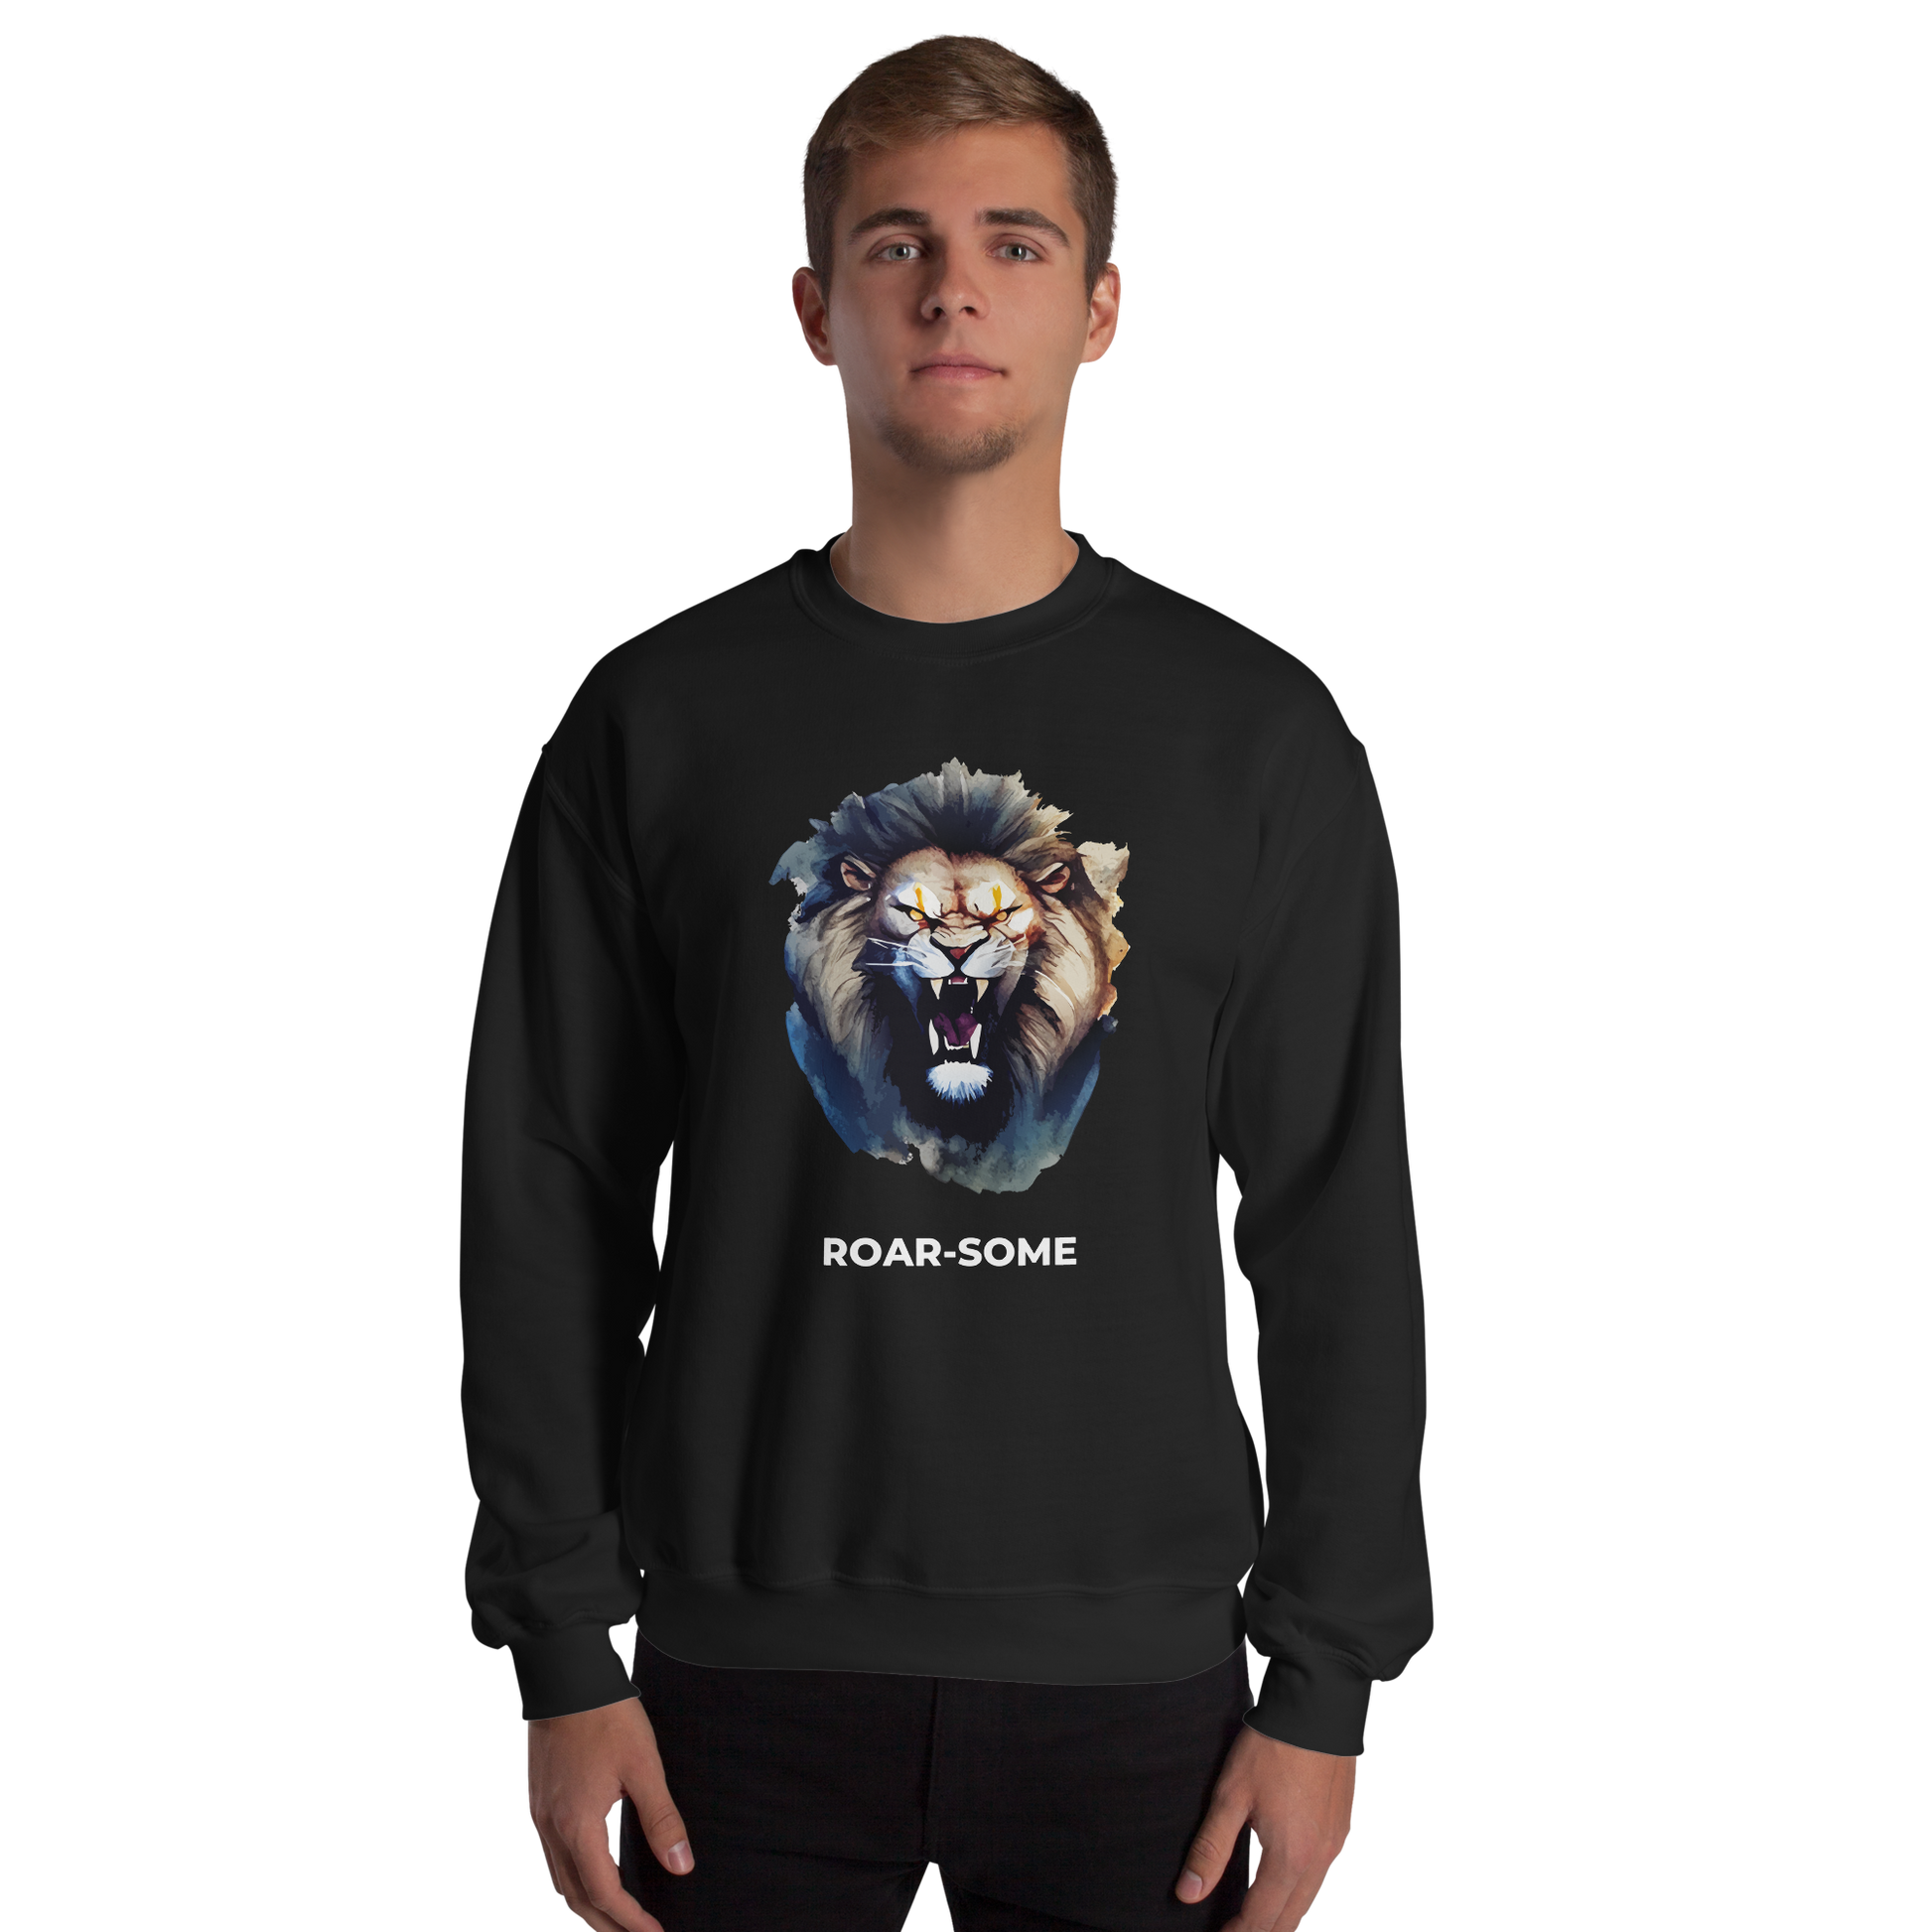 Man wearing a Black Lion Sweatshirt featuring a Roar-Some graphic on the chest - Cool Graphic Lion Sweatshirts - Boozy Fox